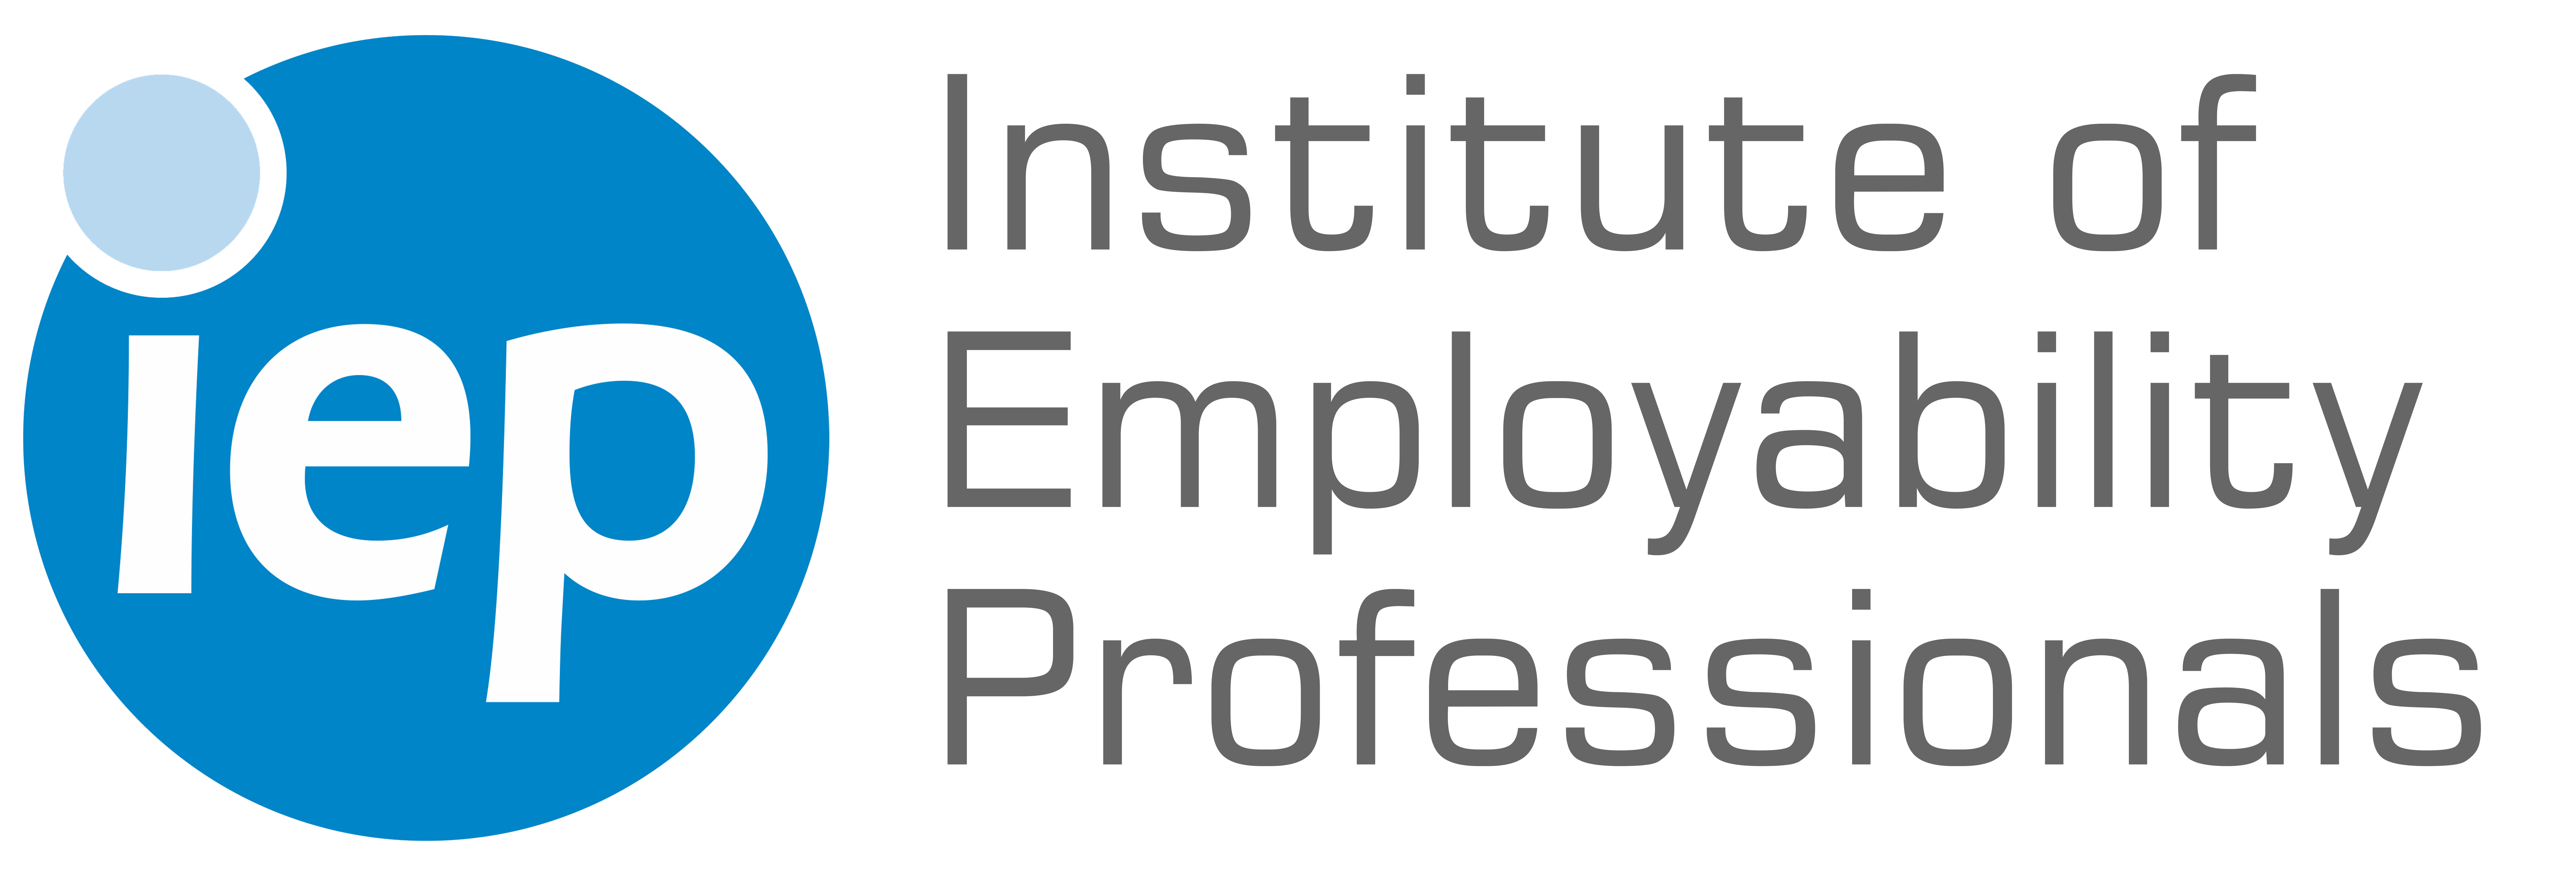 IEP Logo - IEP and Careers England deliver joined up support to sector